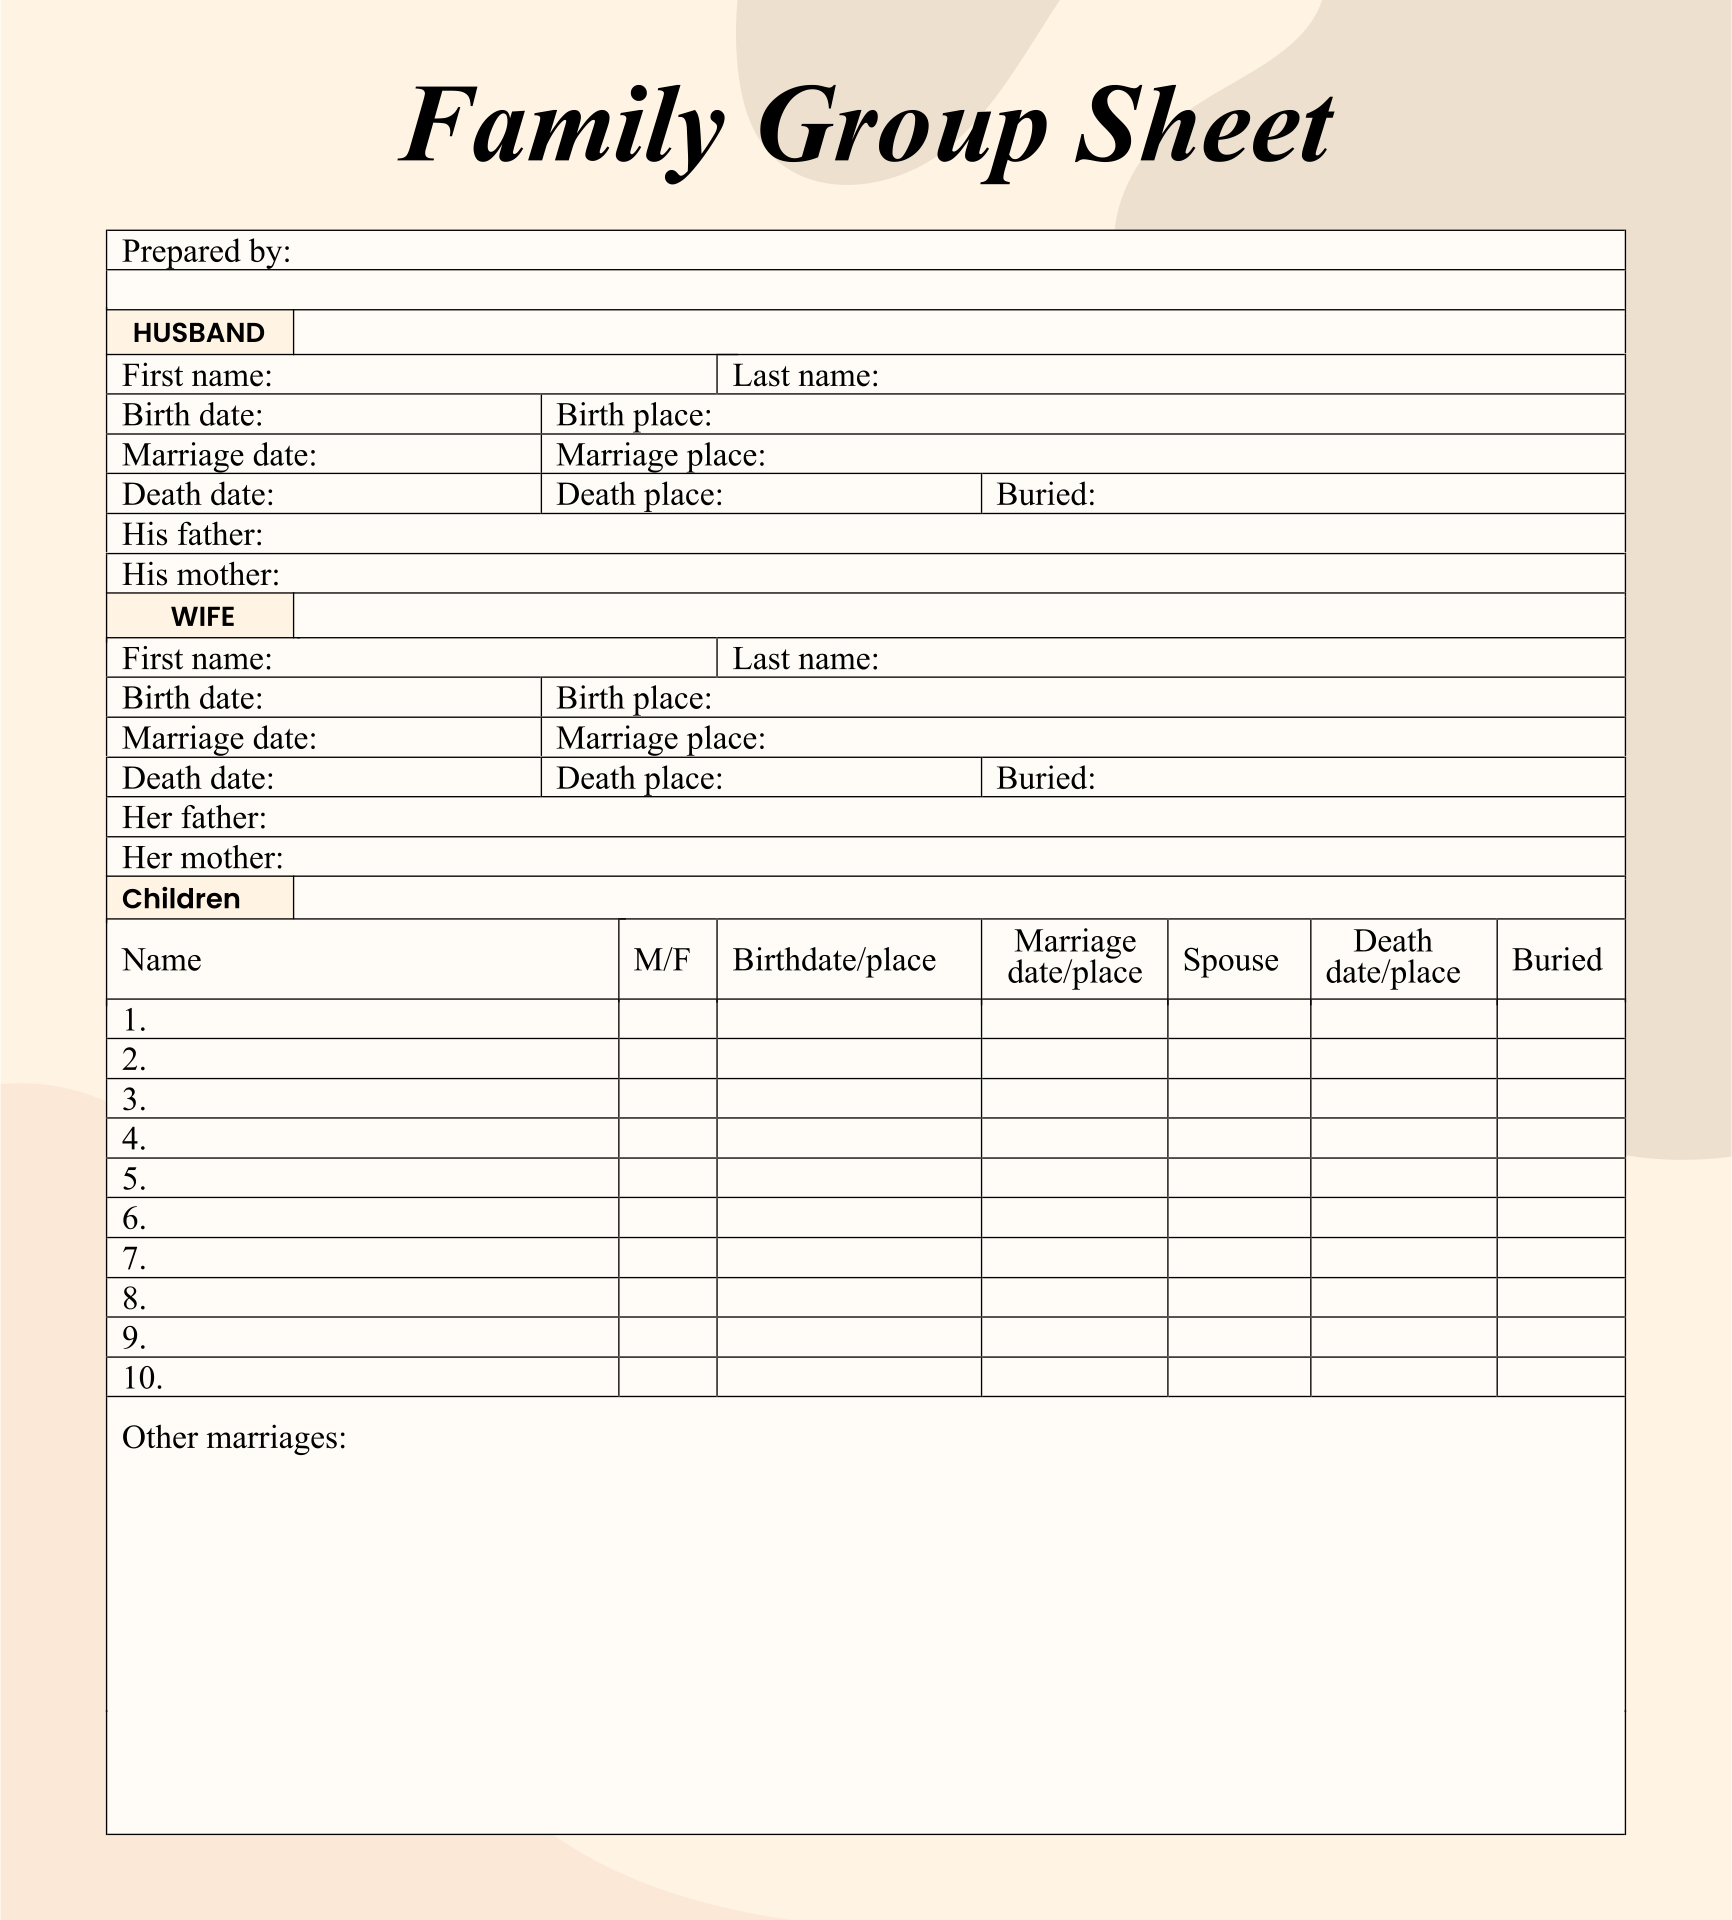 4-best-images-of-free-printable-group-sheets-free-blank-family-group